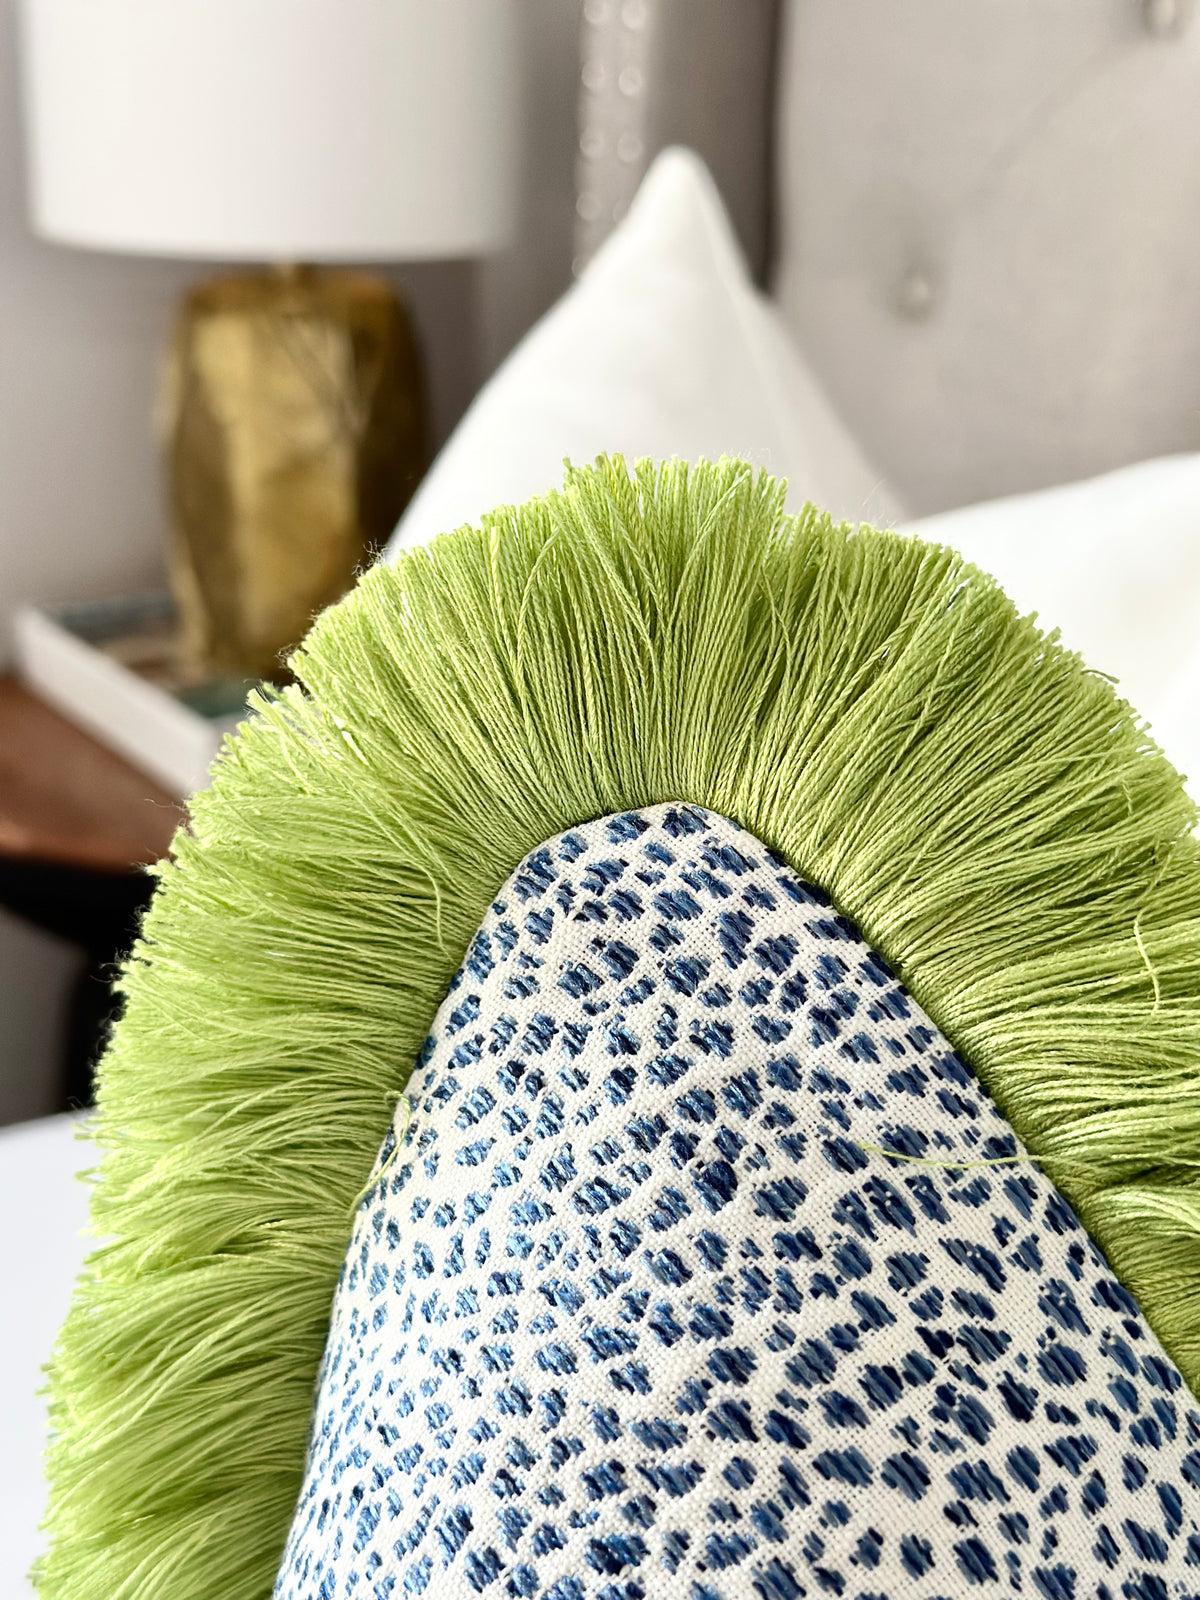 Azure spotted throw pillow cover with green brush fringe detail | CONCELLI  DECOR